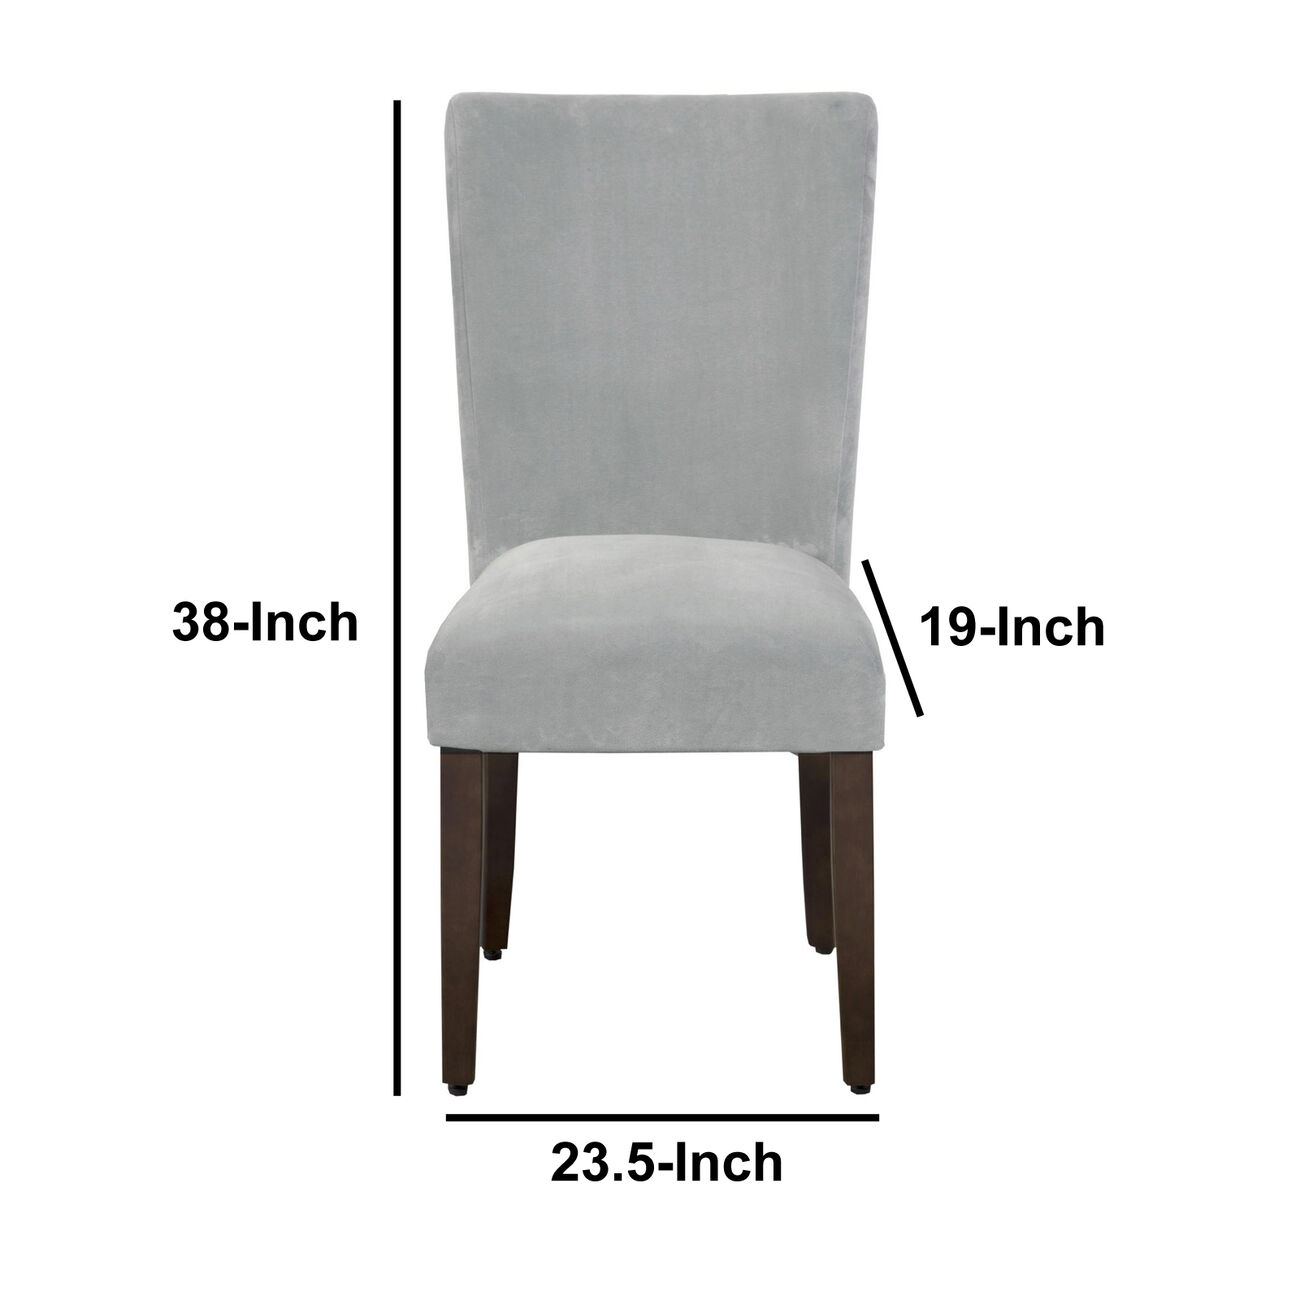 Velvet Upholstered Parson Chair with Wooden Tapered Legs, Gray and Brown, Set of Two